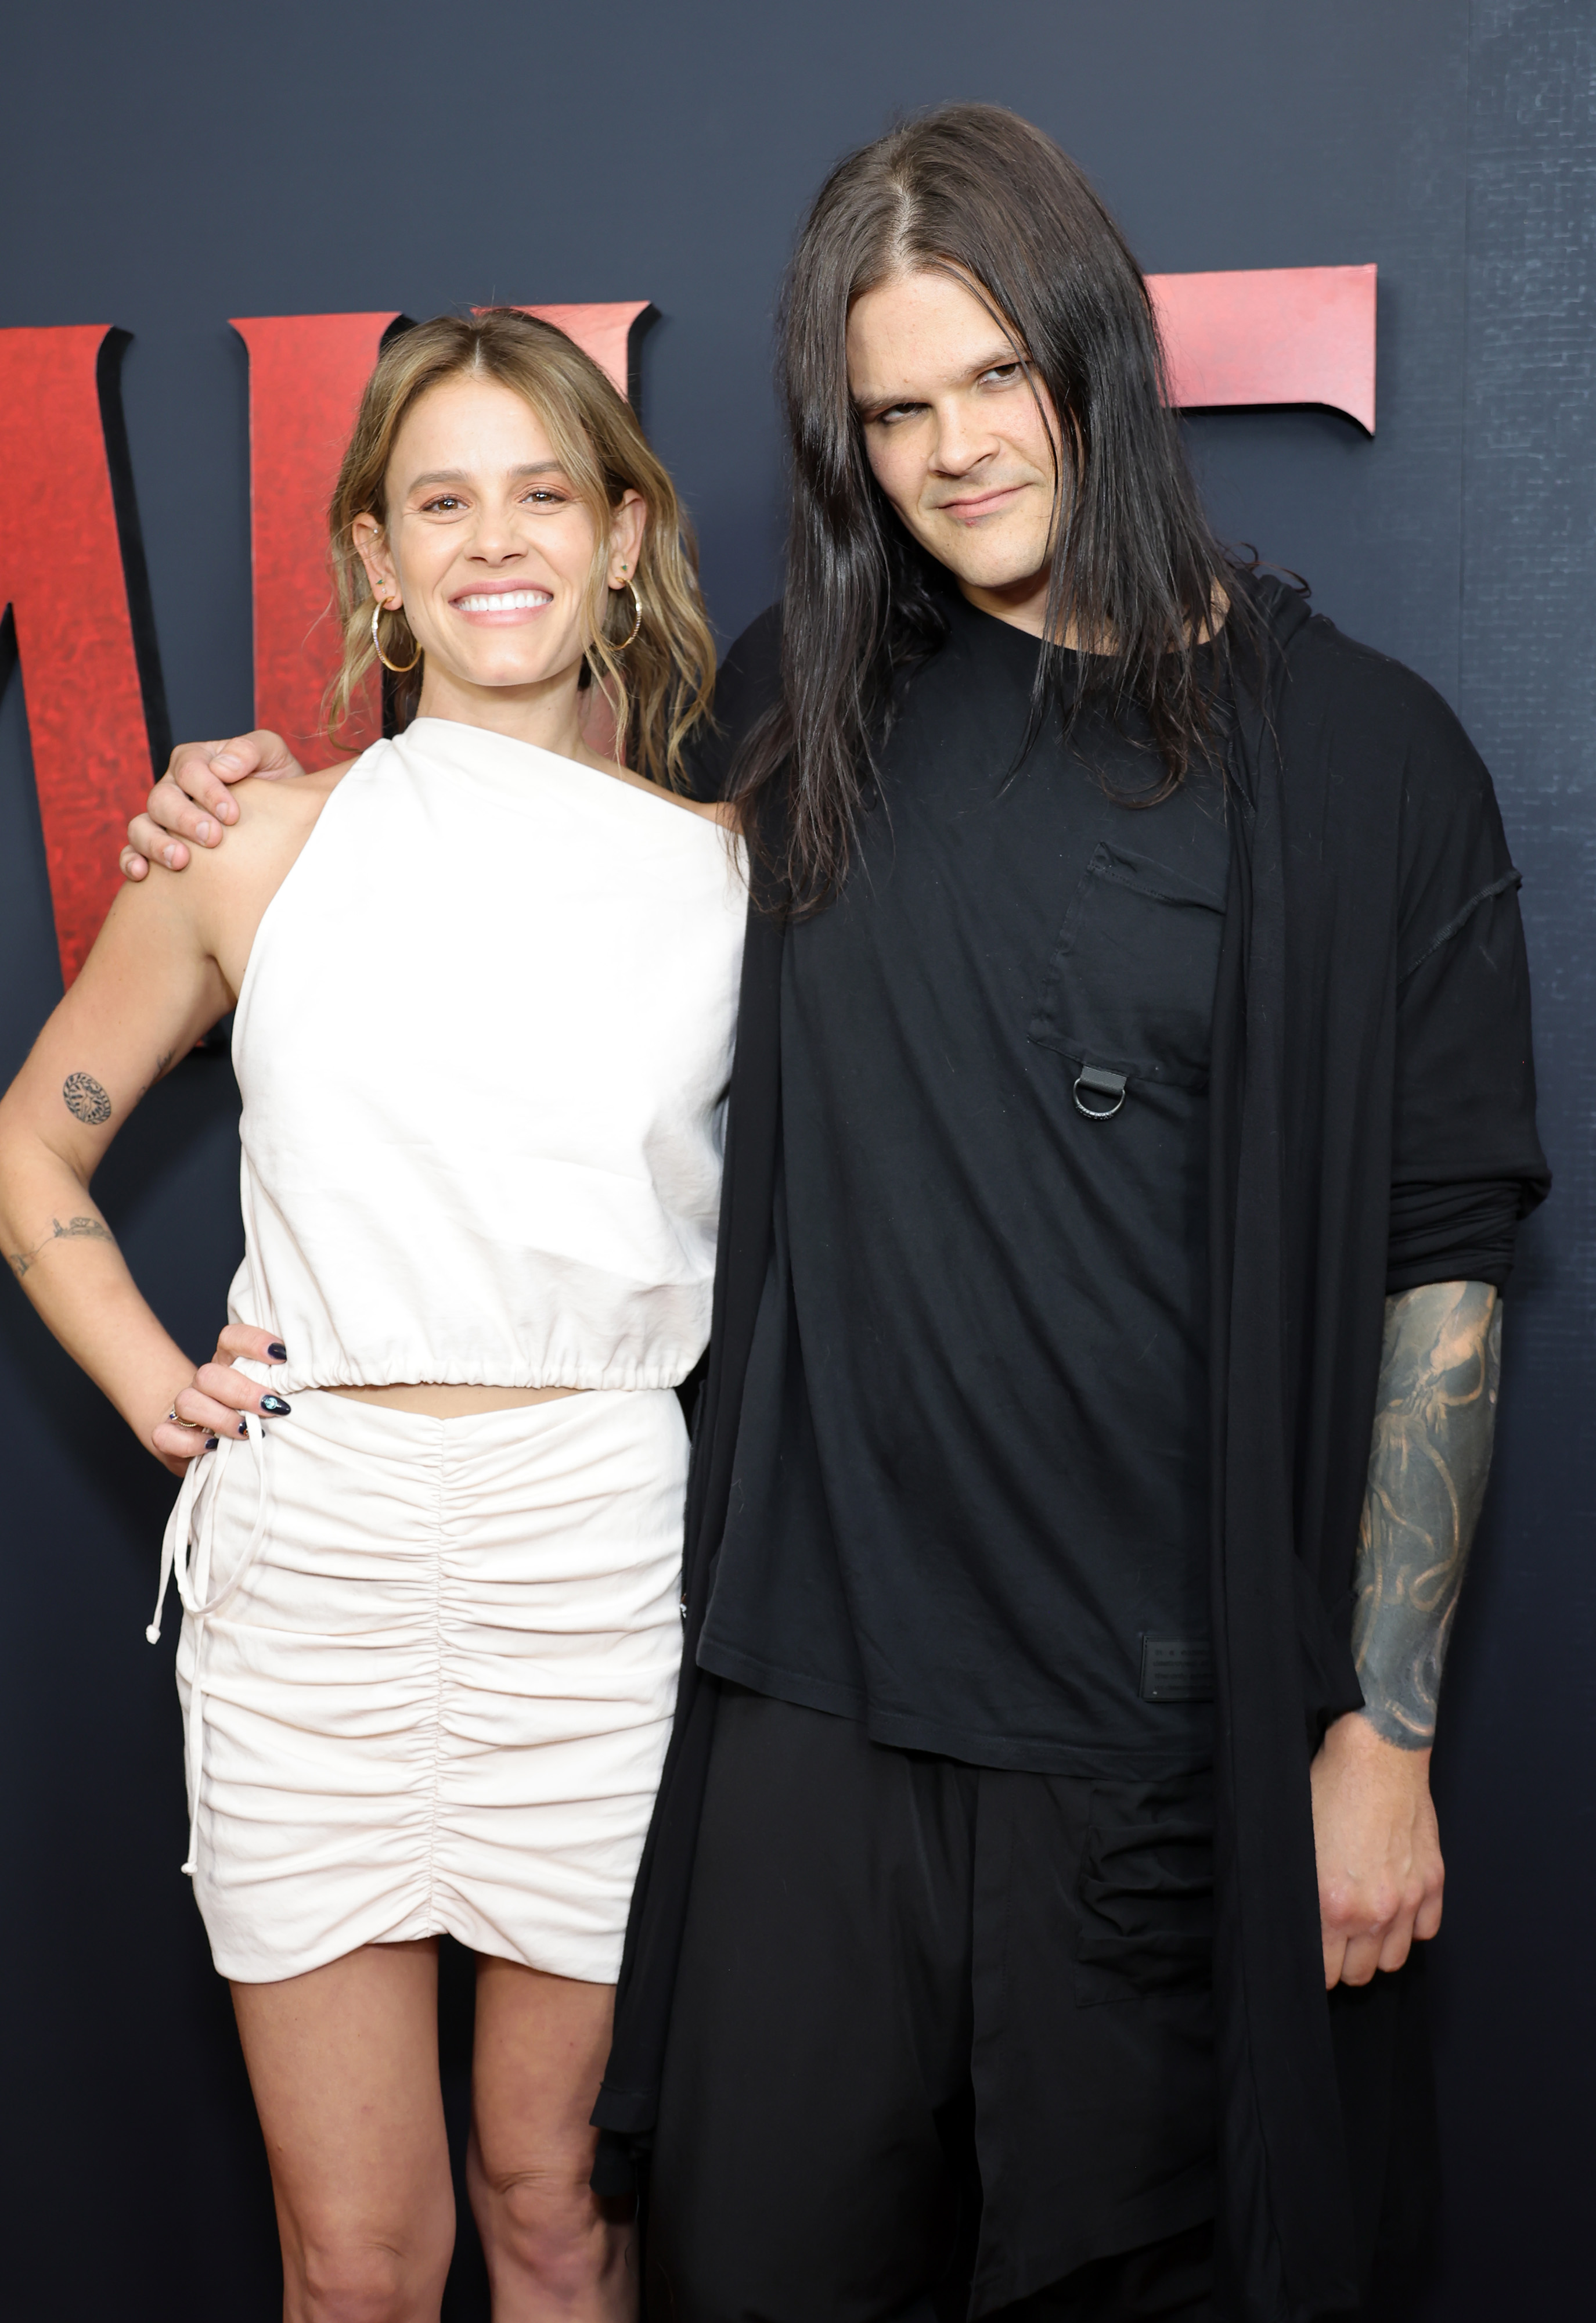 Sosie Bacon and Travis Bacon on September 27, 2022 in Santa Monica, California. | Source: Getty Images